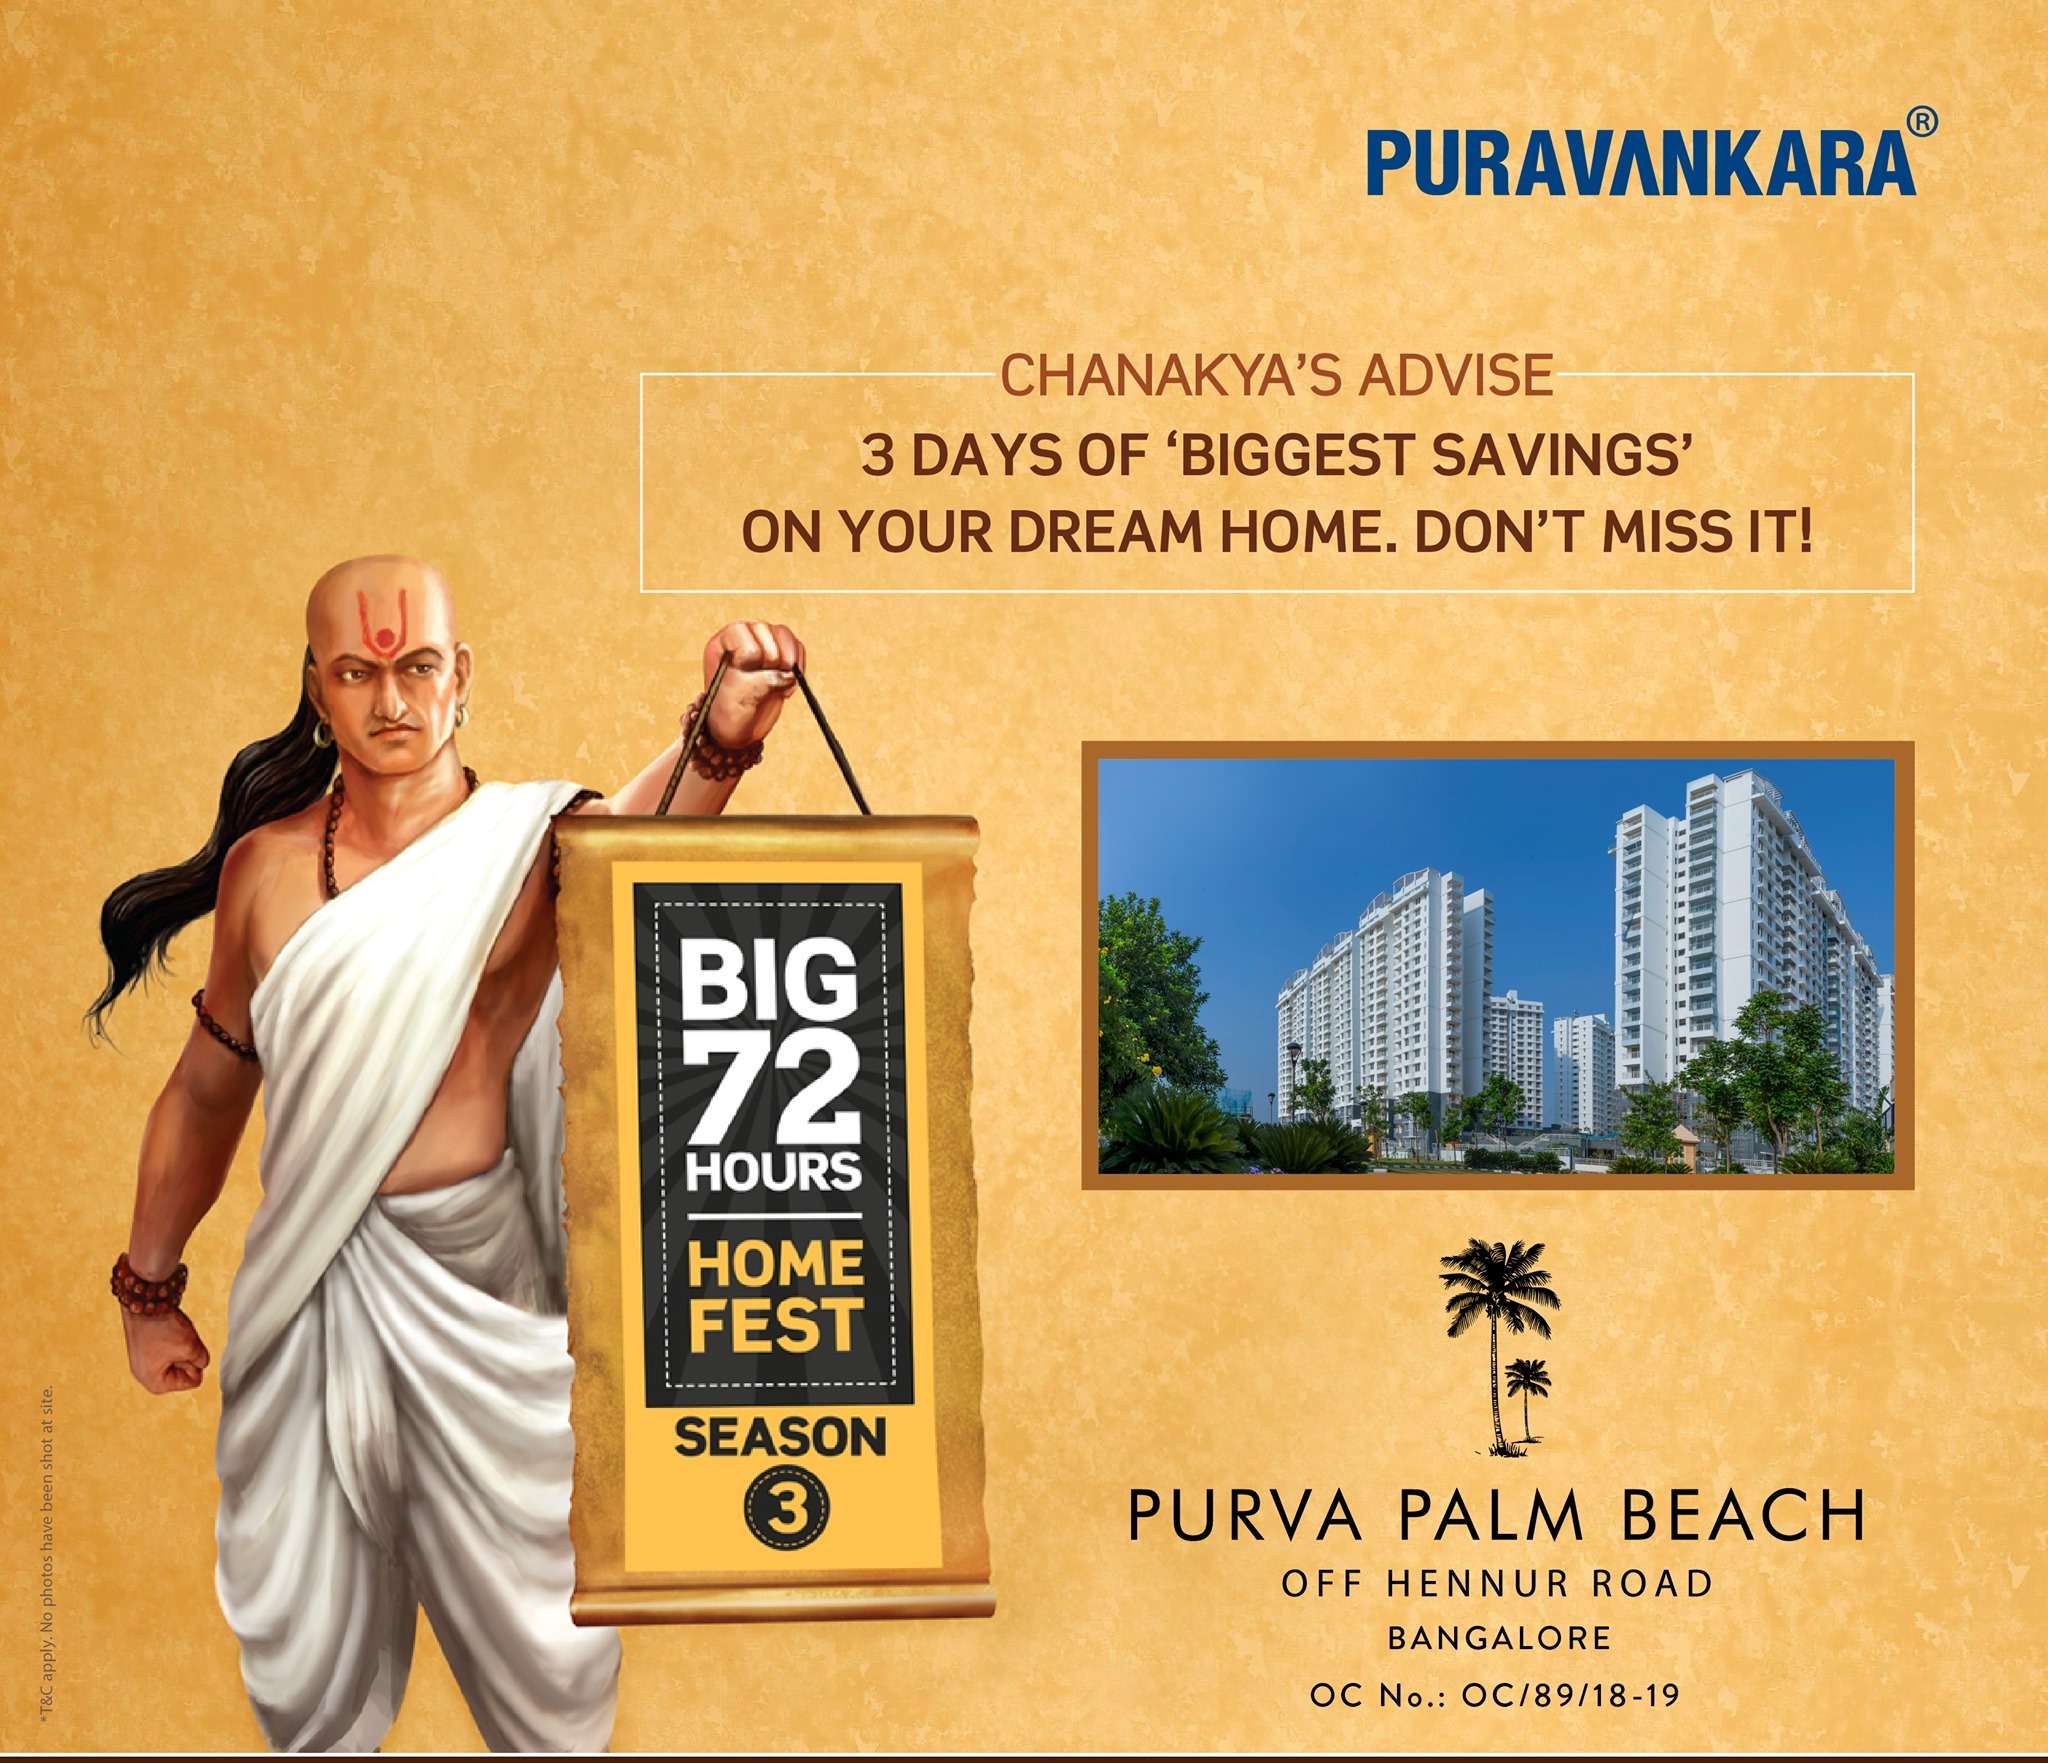 Purva Palm Beach offers biggest savings at big 72 hours home fest in Bangalore Update